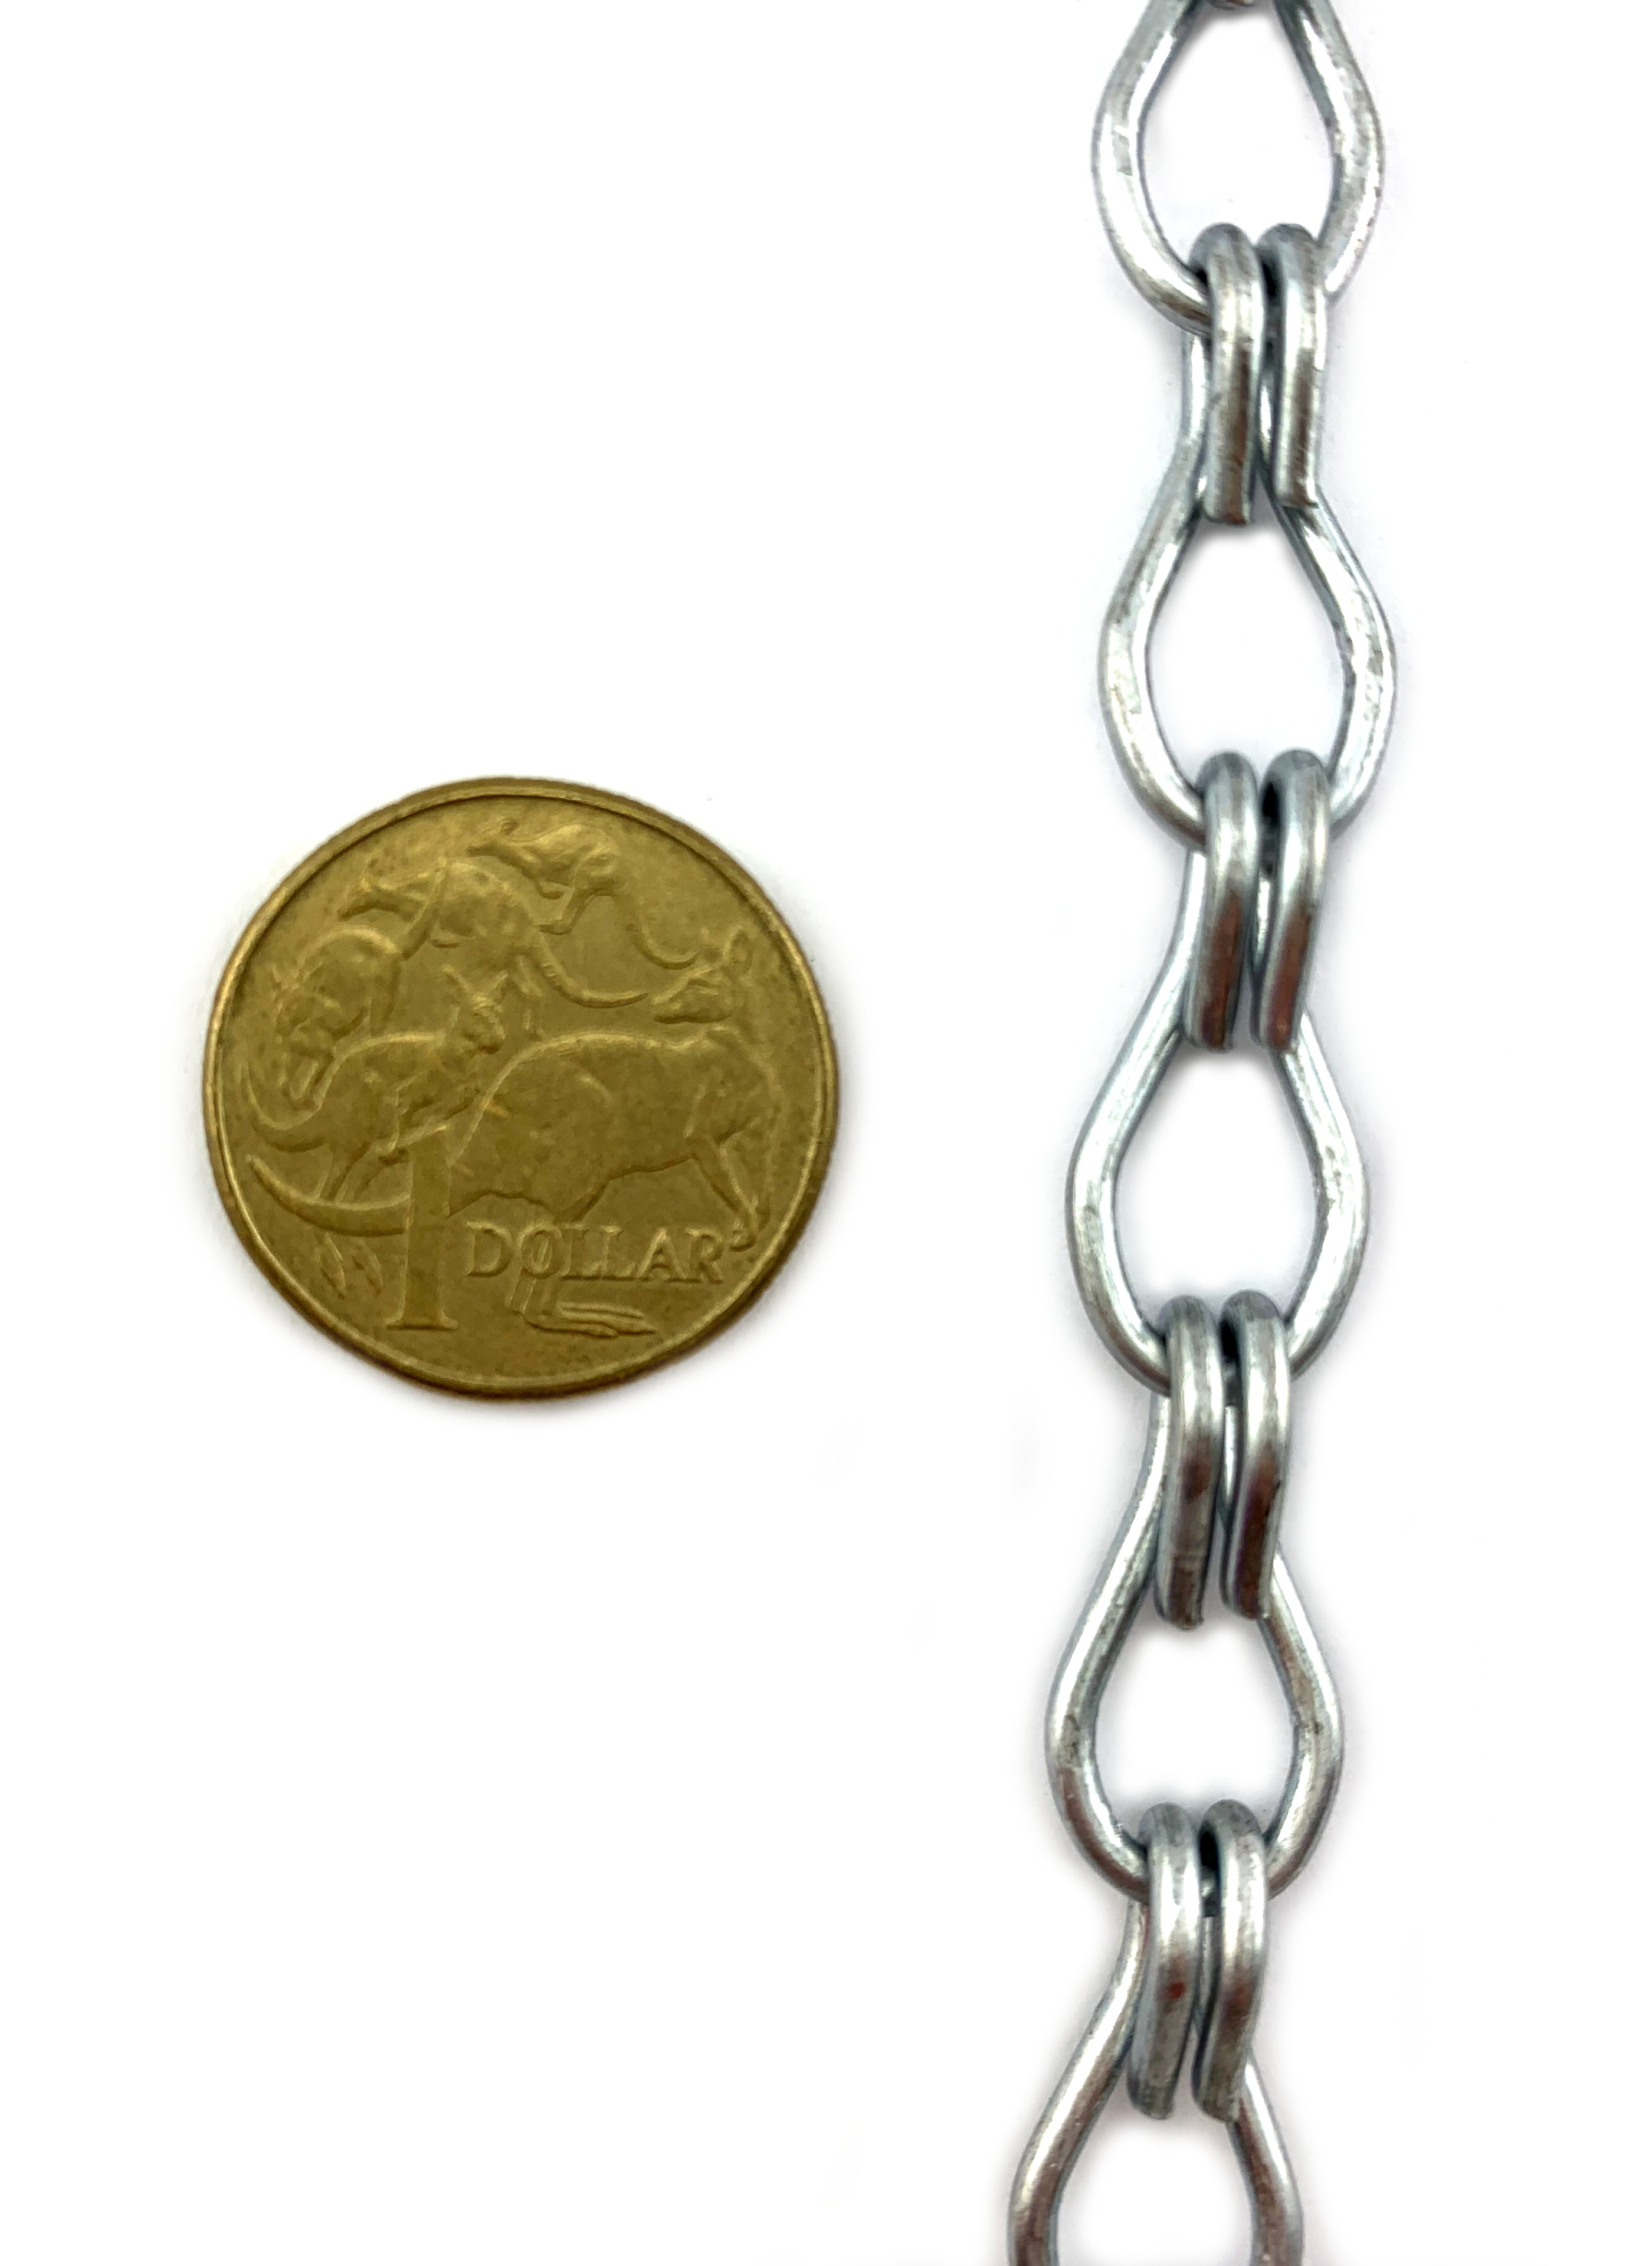 Double Jack Chain Galvanised size 2mm x 50 metres. Australian made.